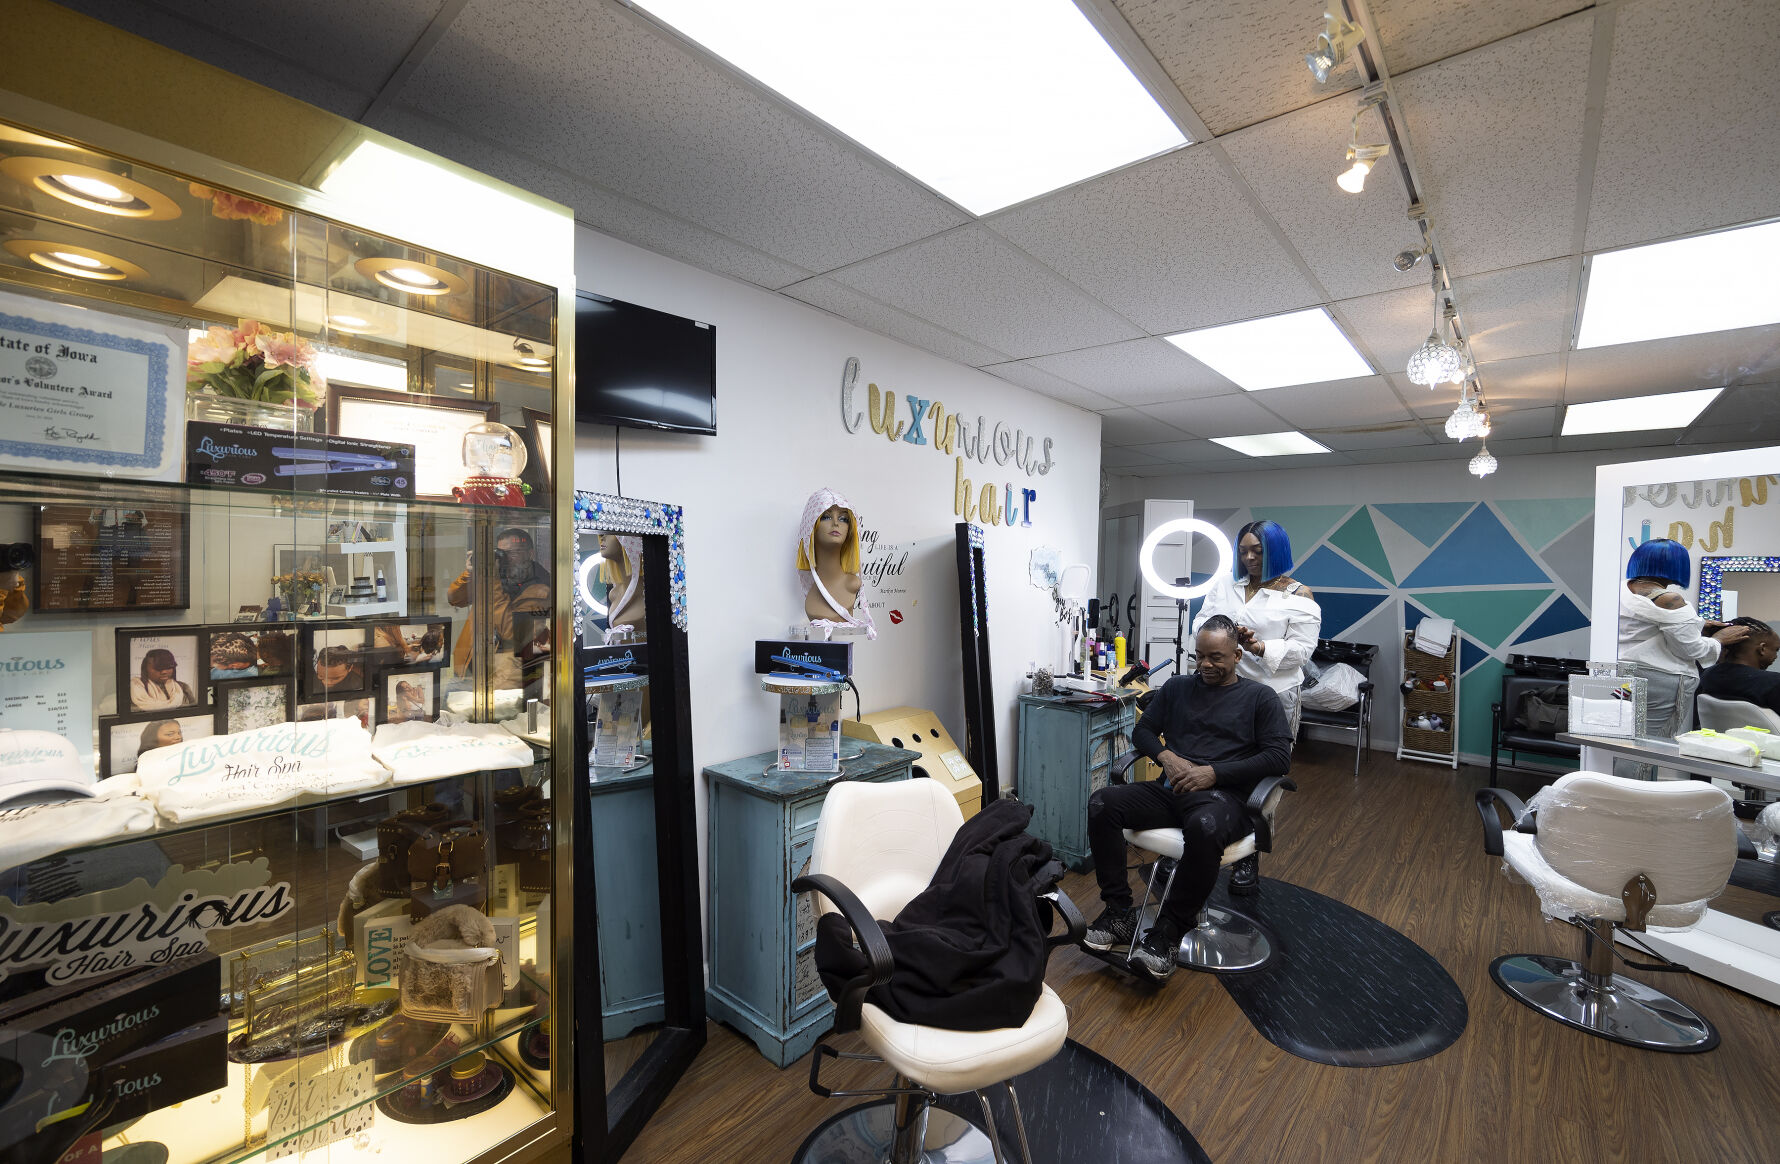 Salon owner Shamika Rainer works on the hair of Willie Dunbar at Luxurious Hair Spa on Central Avenue in Dubuque.    PHOTO CREDIT: Stephen Gassman